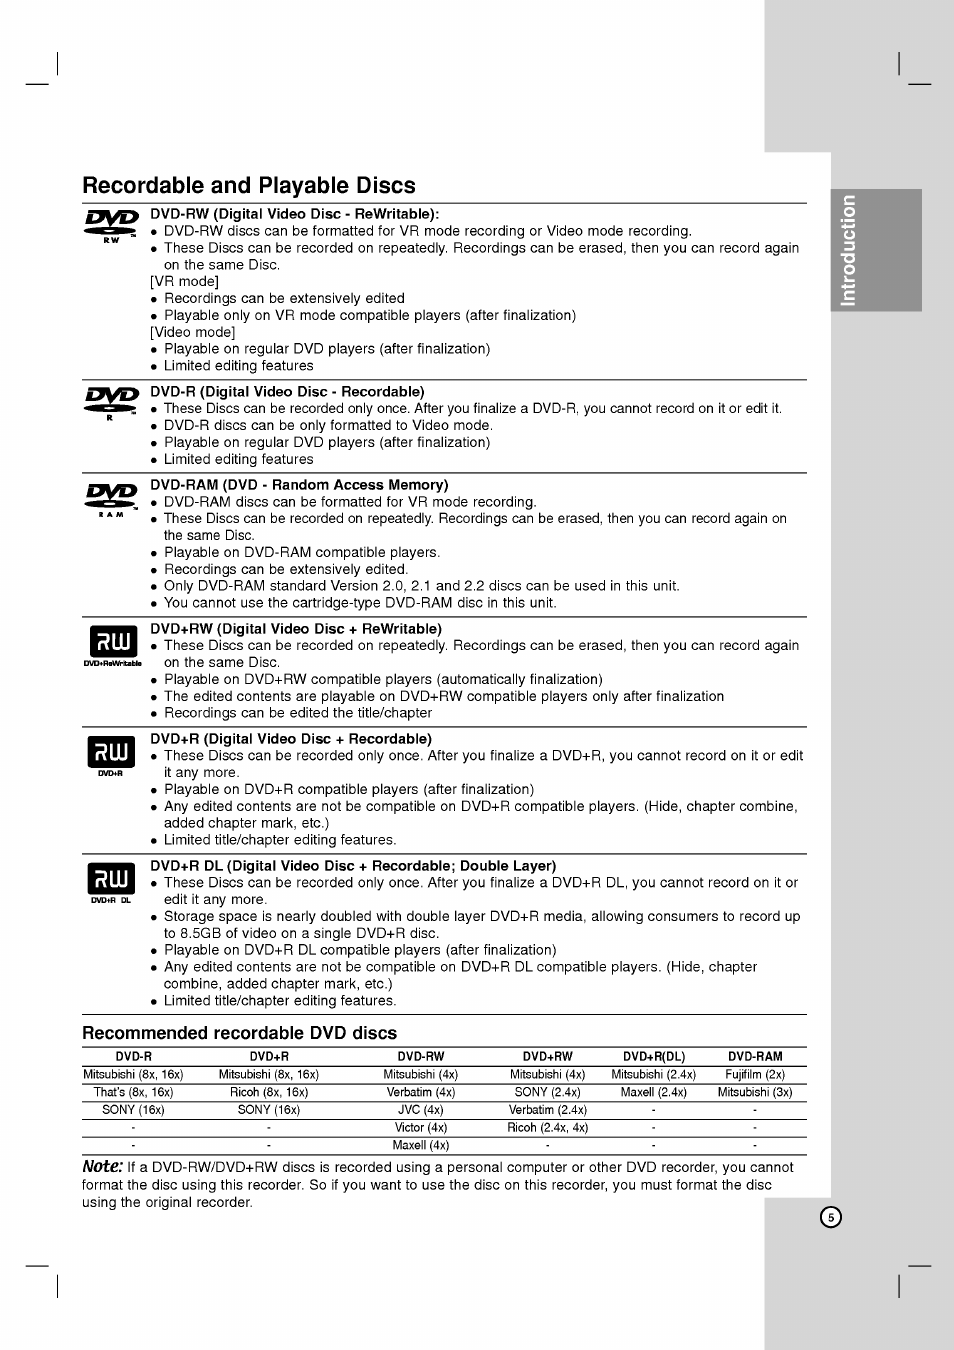 Recordable and playable discs | LG RH2T160 User Manual | Page 5 / 41